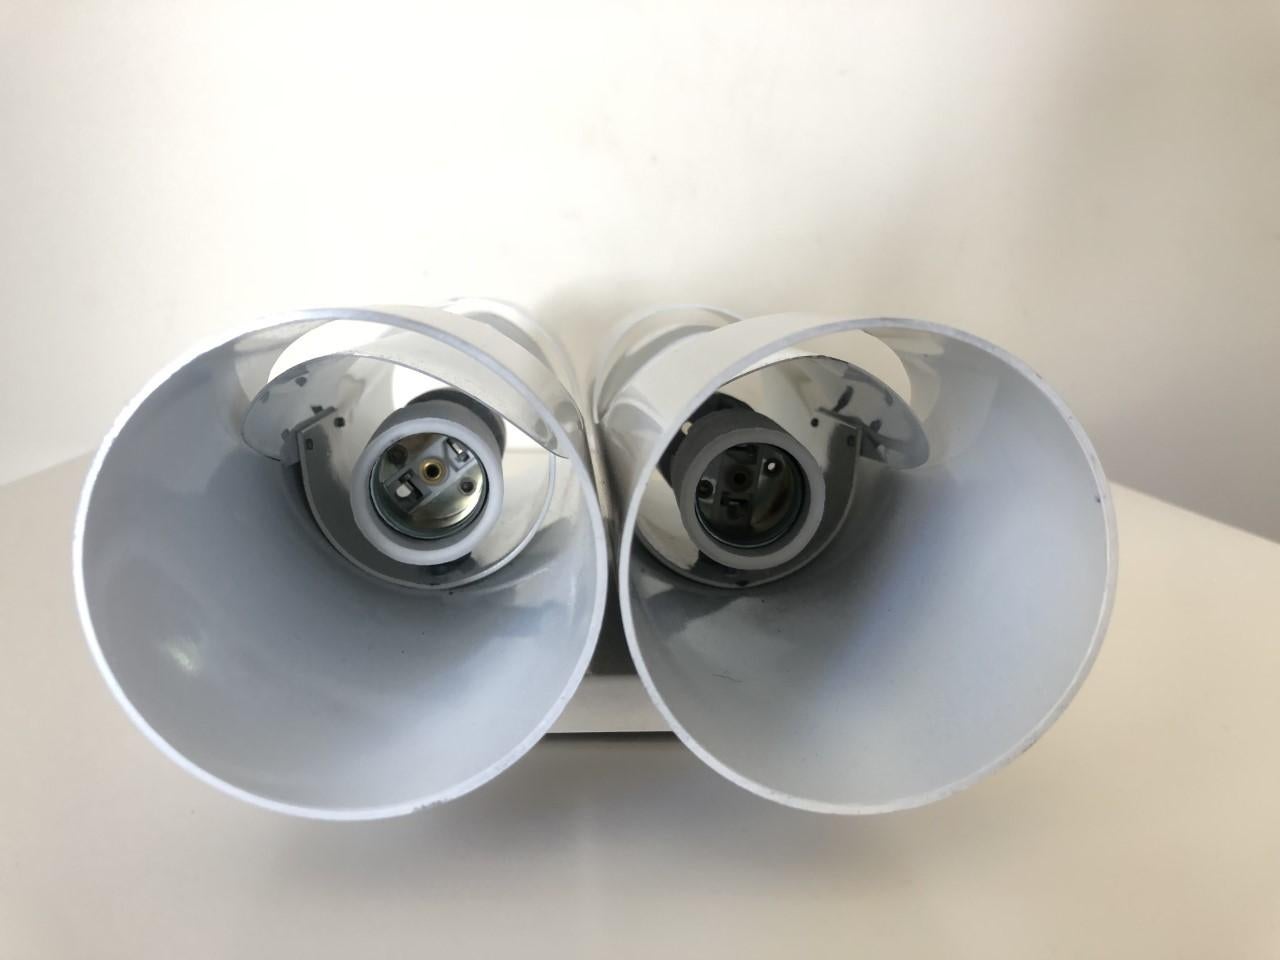 Pair of Midcentury Metal Tubular Wall Sconces by Marca, S.L., 1980s For Sale 1